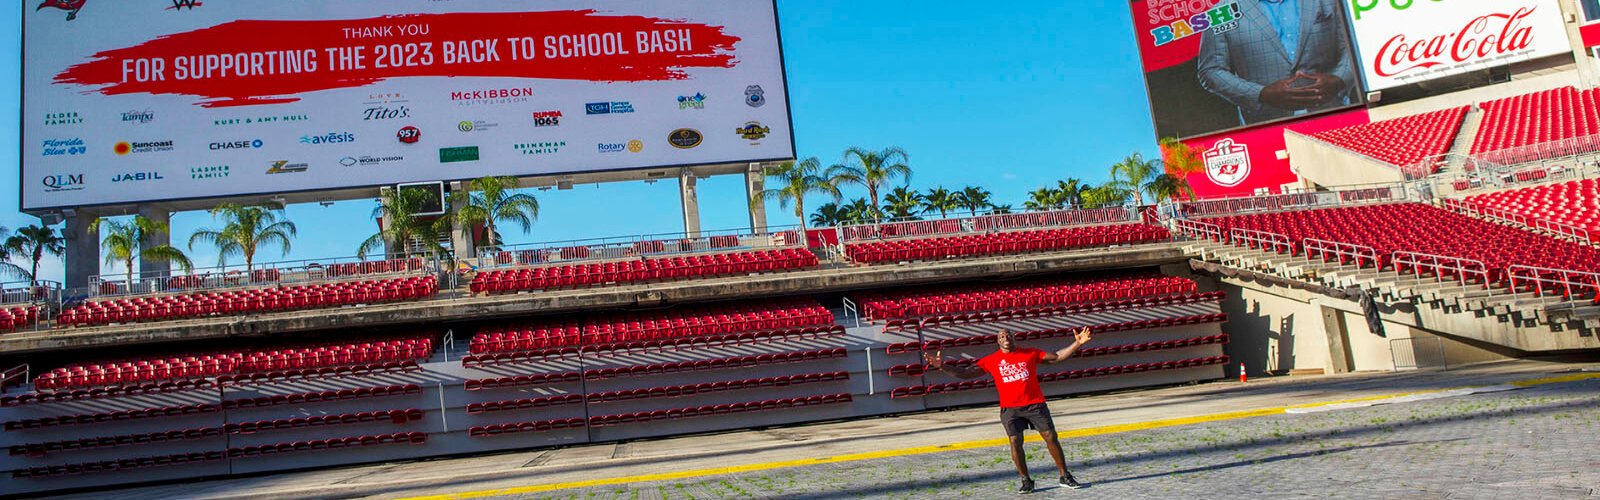 With help from more than 100 corporate sponsors and hundreds of volunteers, the Bullard Family Foundation Back to School Bash at Raymond James Stadium provided thousands of families with backpacks, school supplies and medical and dental services.